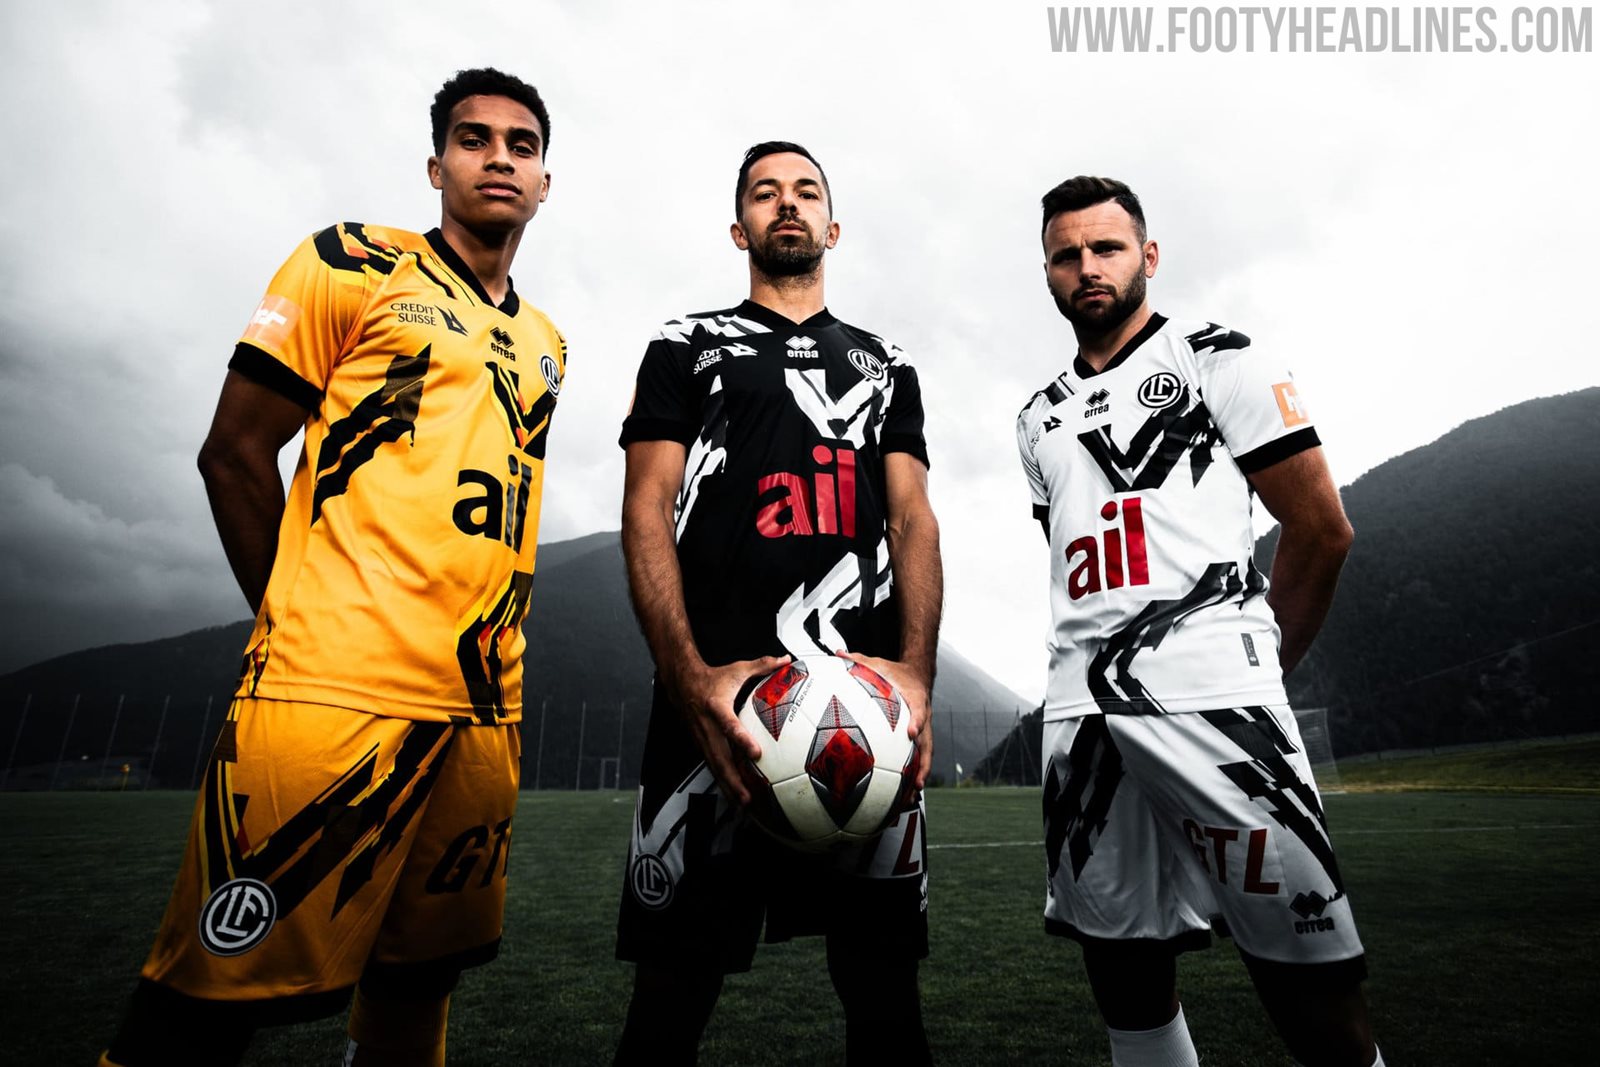 ACERBIS – FC LUGANO: UNVEILED THE THREE NEW JERSEYS (HOME, AWAY, THIRD) OF  THE SWISS FOOTBALL TEAM